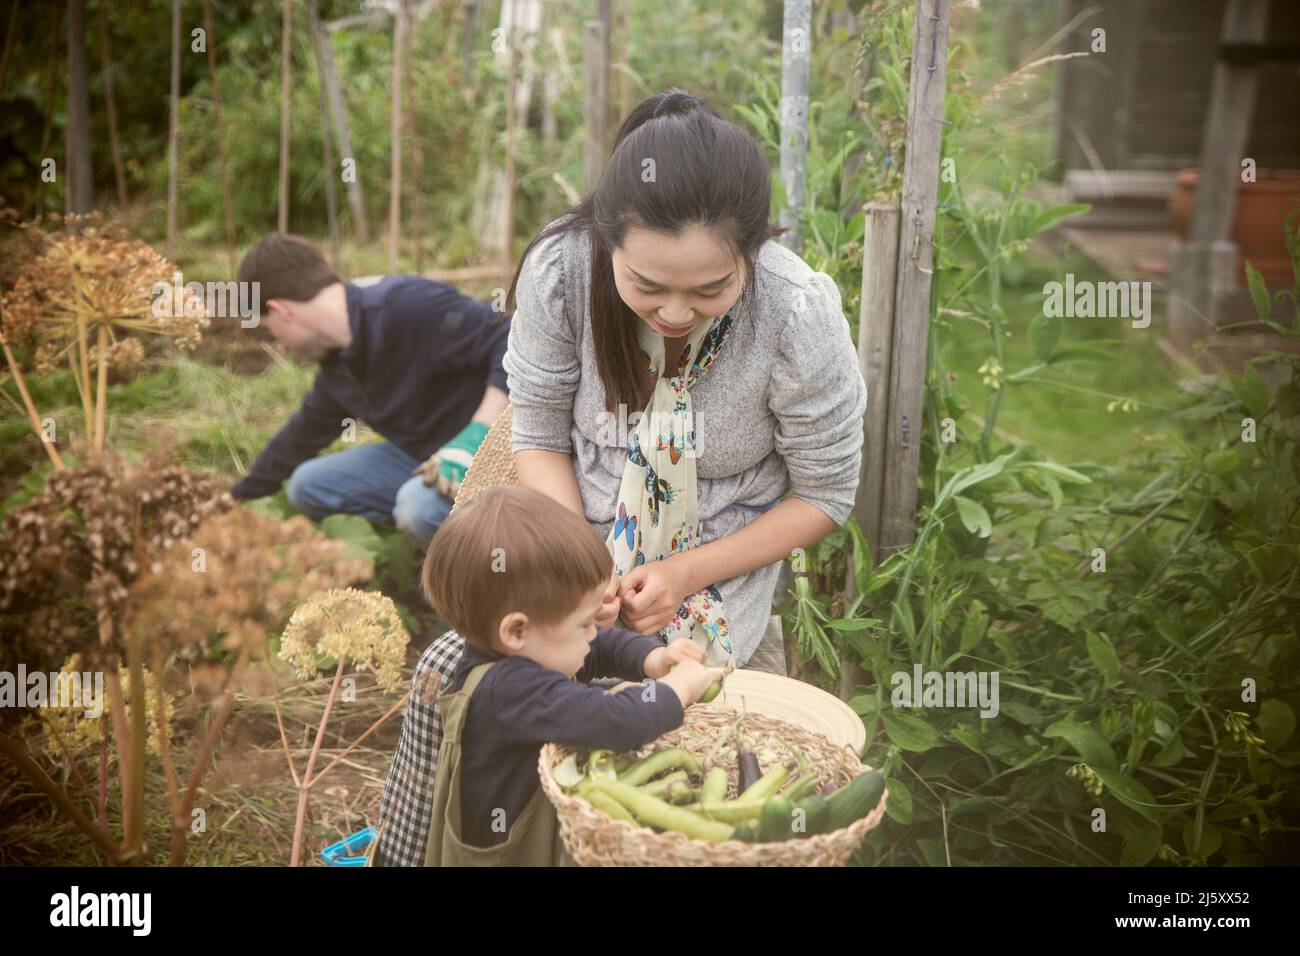 Mother and son harvesting vegetables in garden Stock Photo